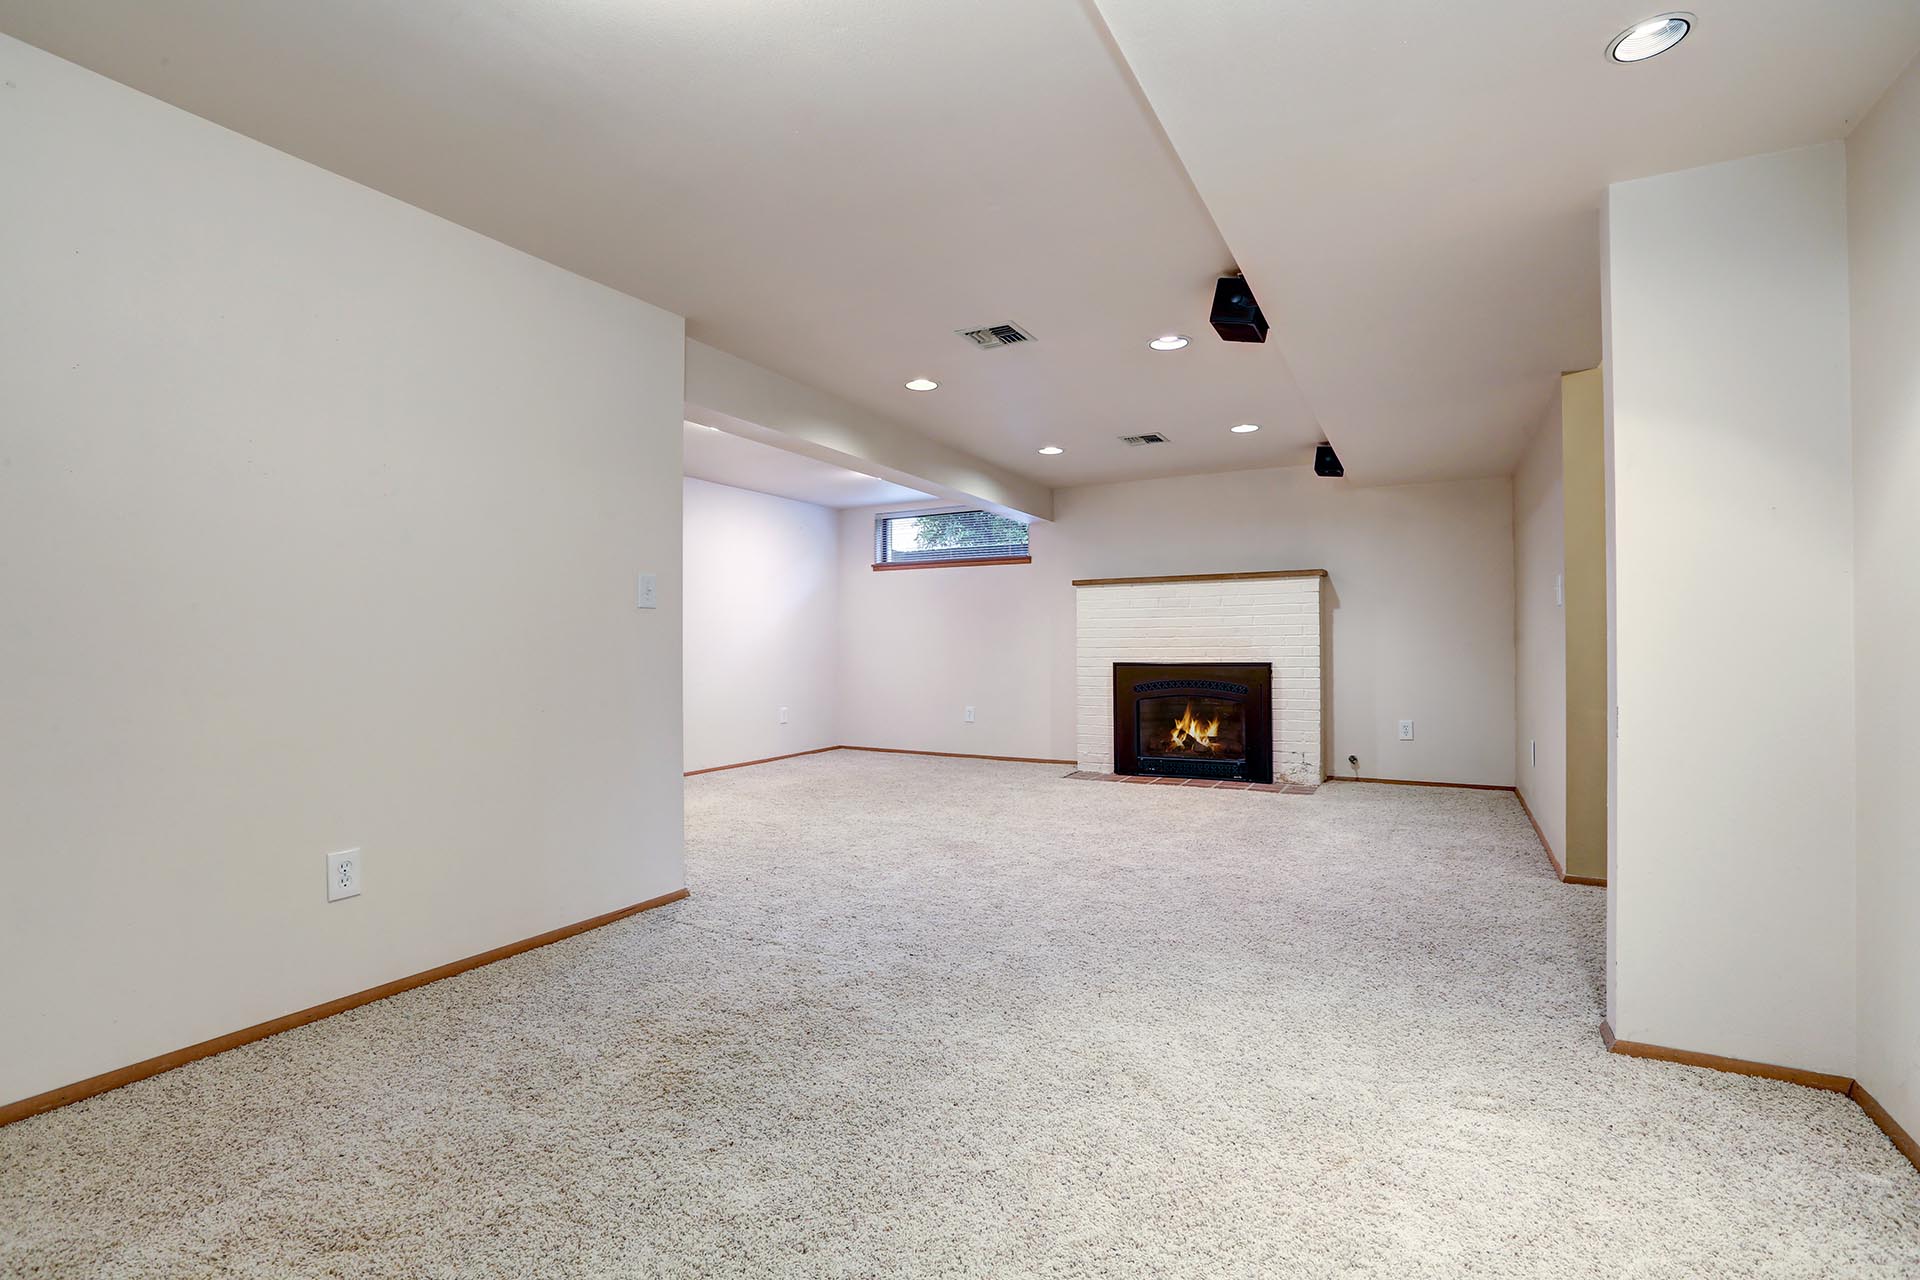 More space from Basement Remodeling by Homecare Remodeling - Bloomington, MN